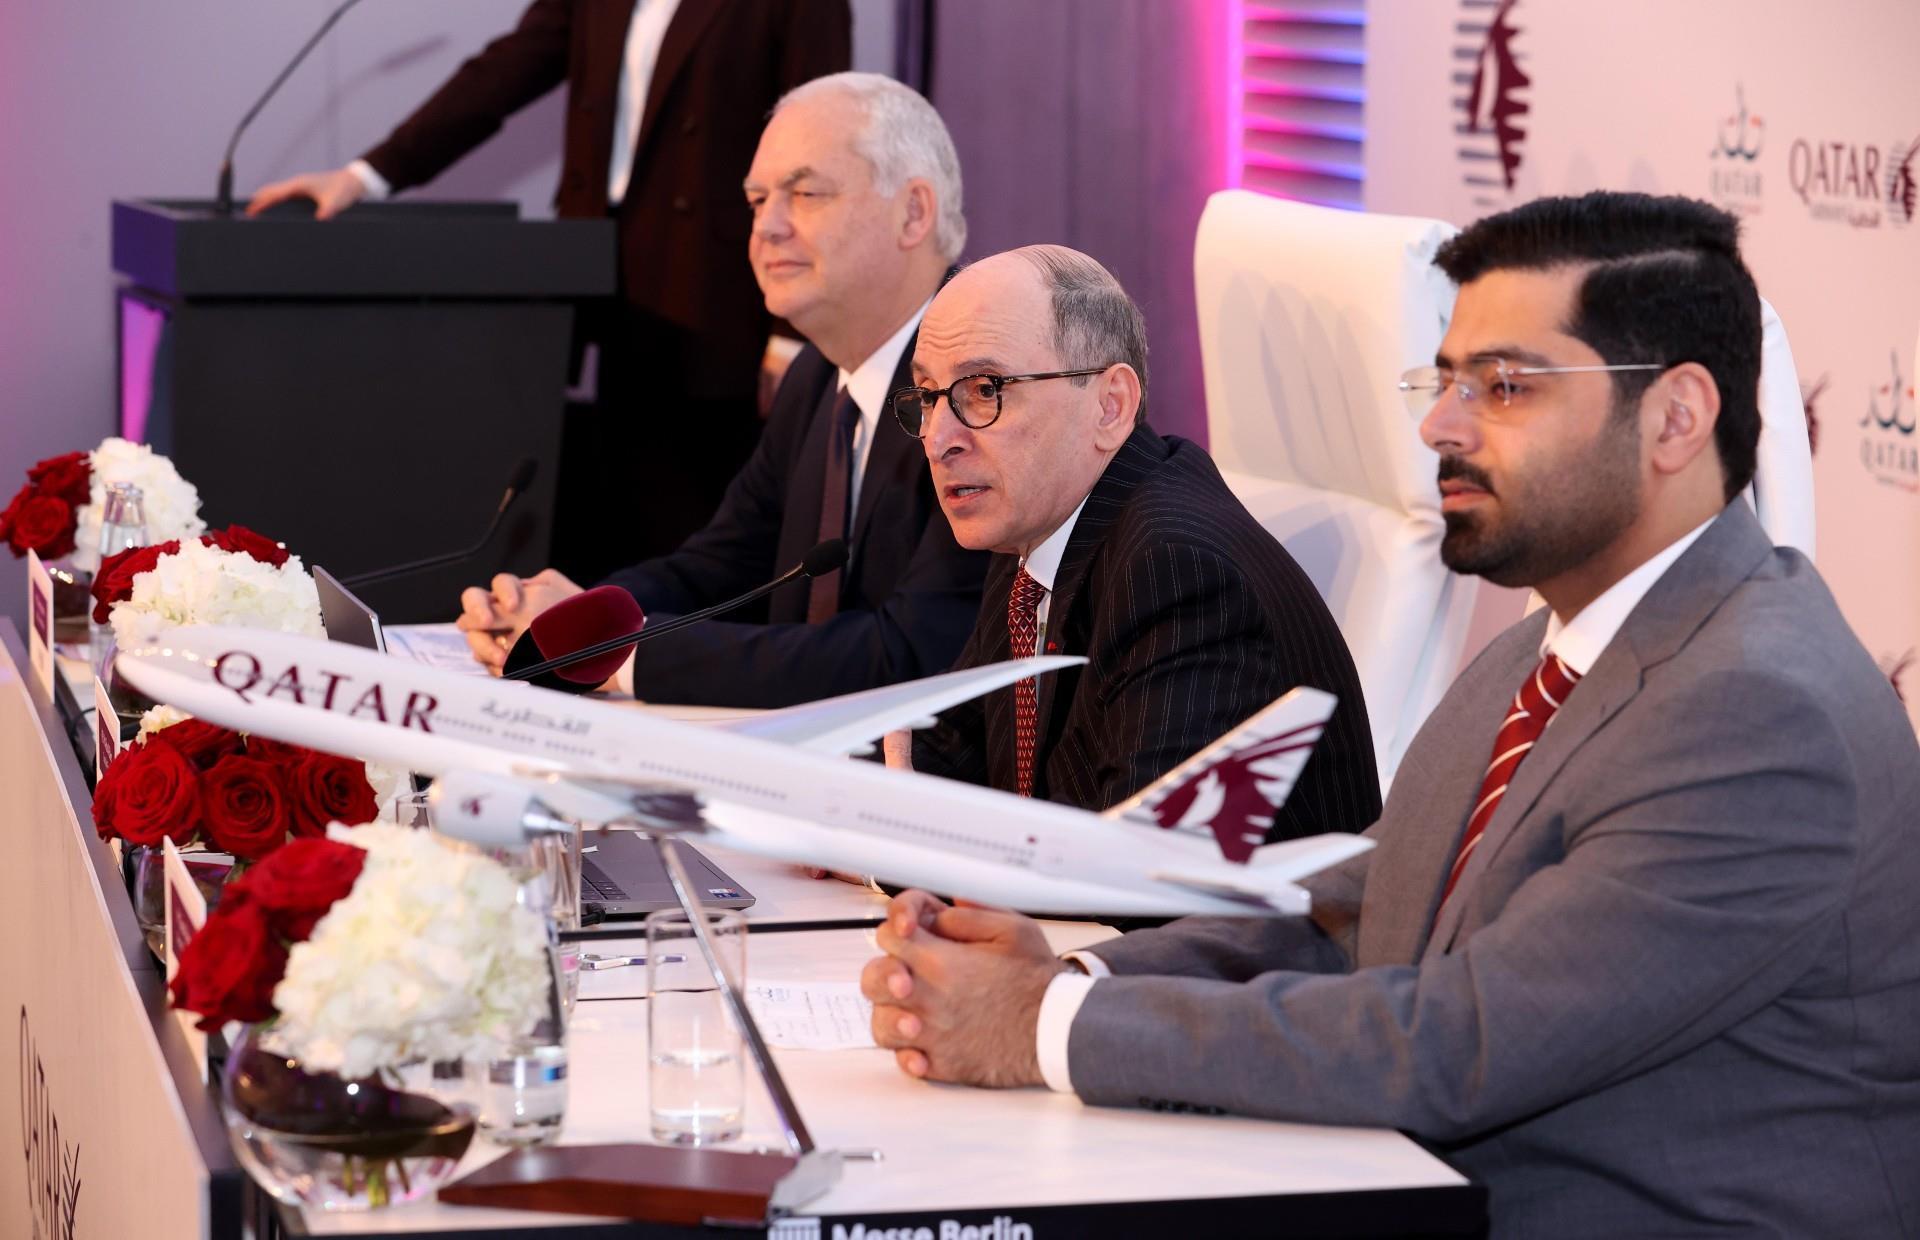 Deliveries key as Qatar Airways adds seven new routes in major expansion, News